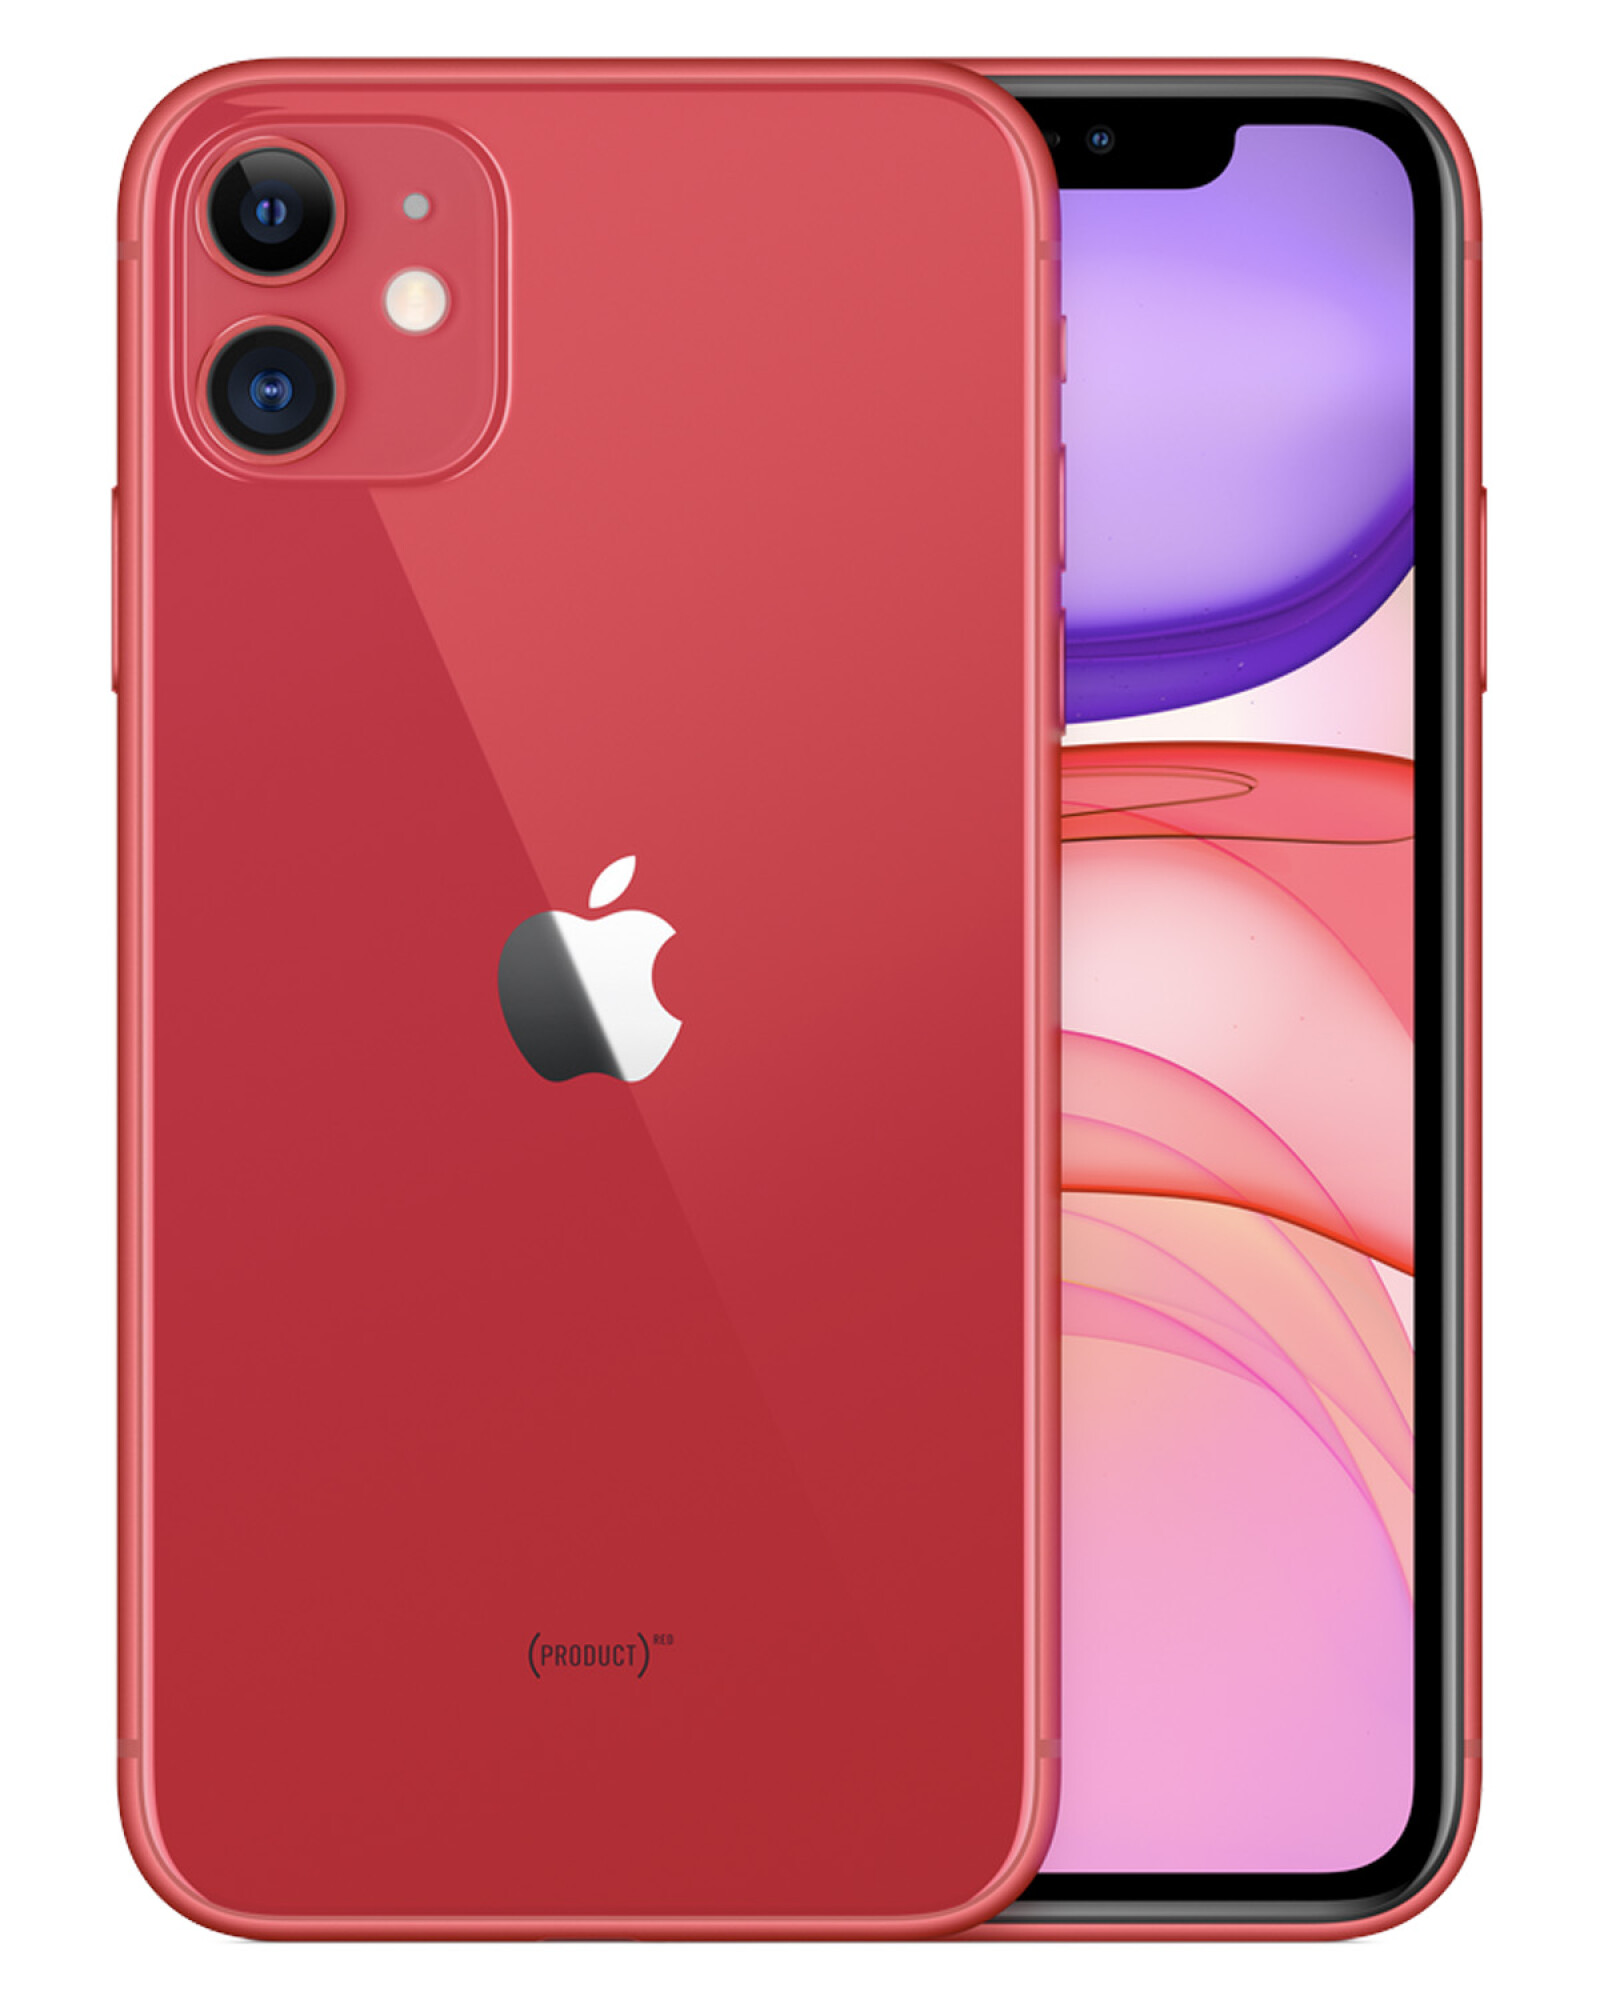 Refurbished Retail Grade Apple iPhone 11 64GB HSO Unlocked - Red IPH11-64GB-RD-A UPC  - IPH11-64GB-RD-A